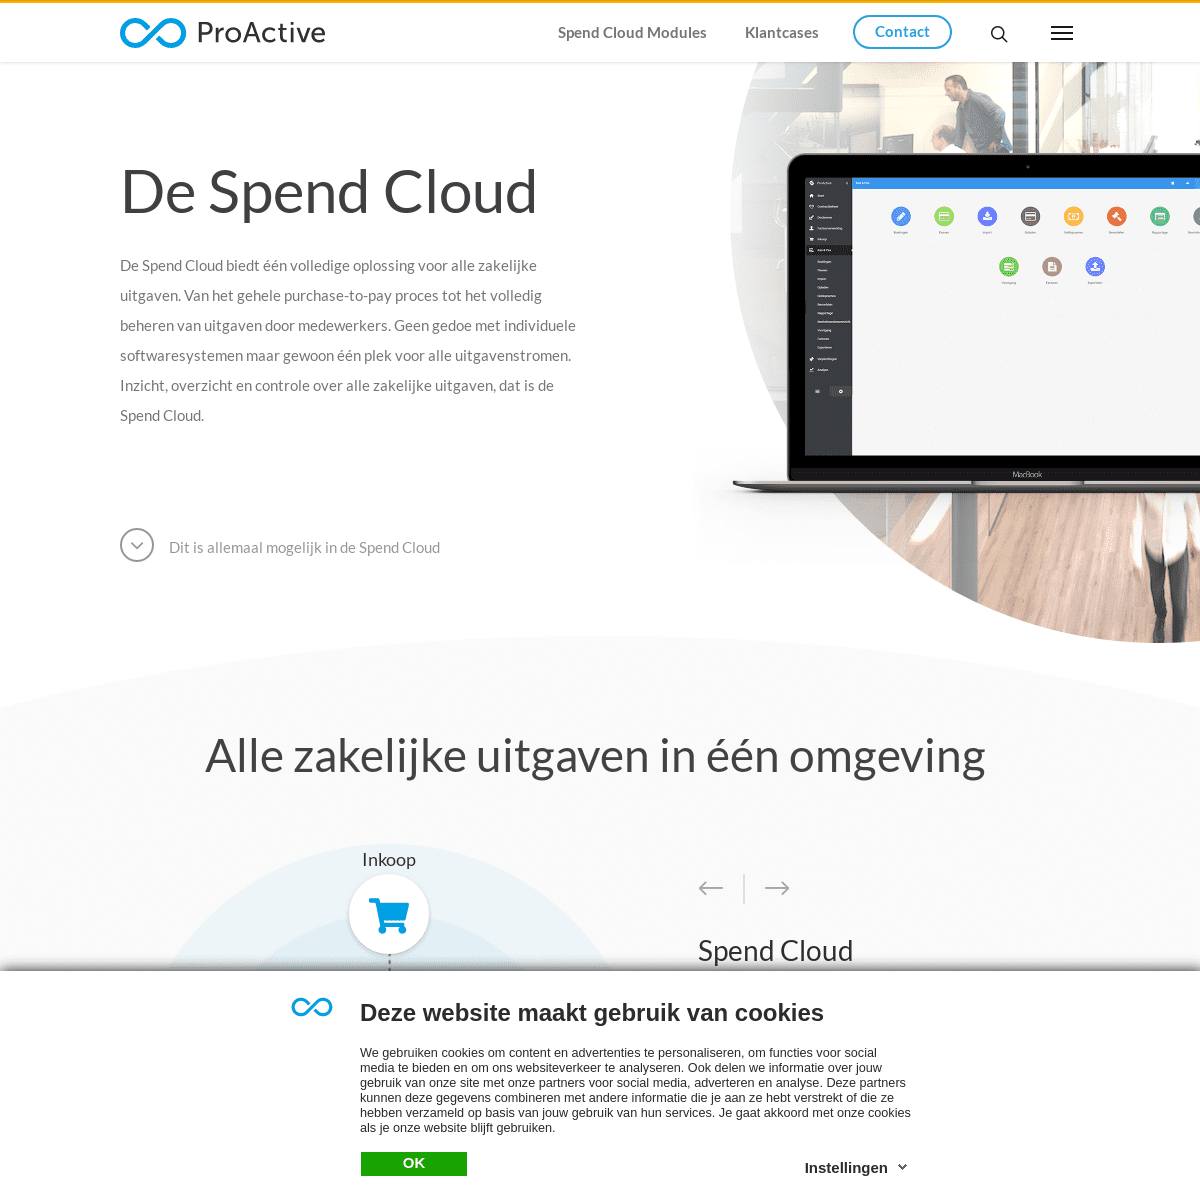 A complete backup of proactive.nl